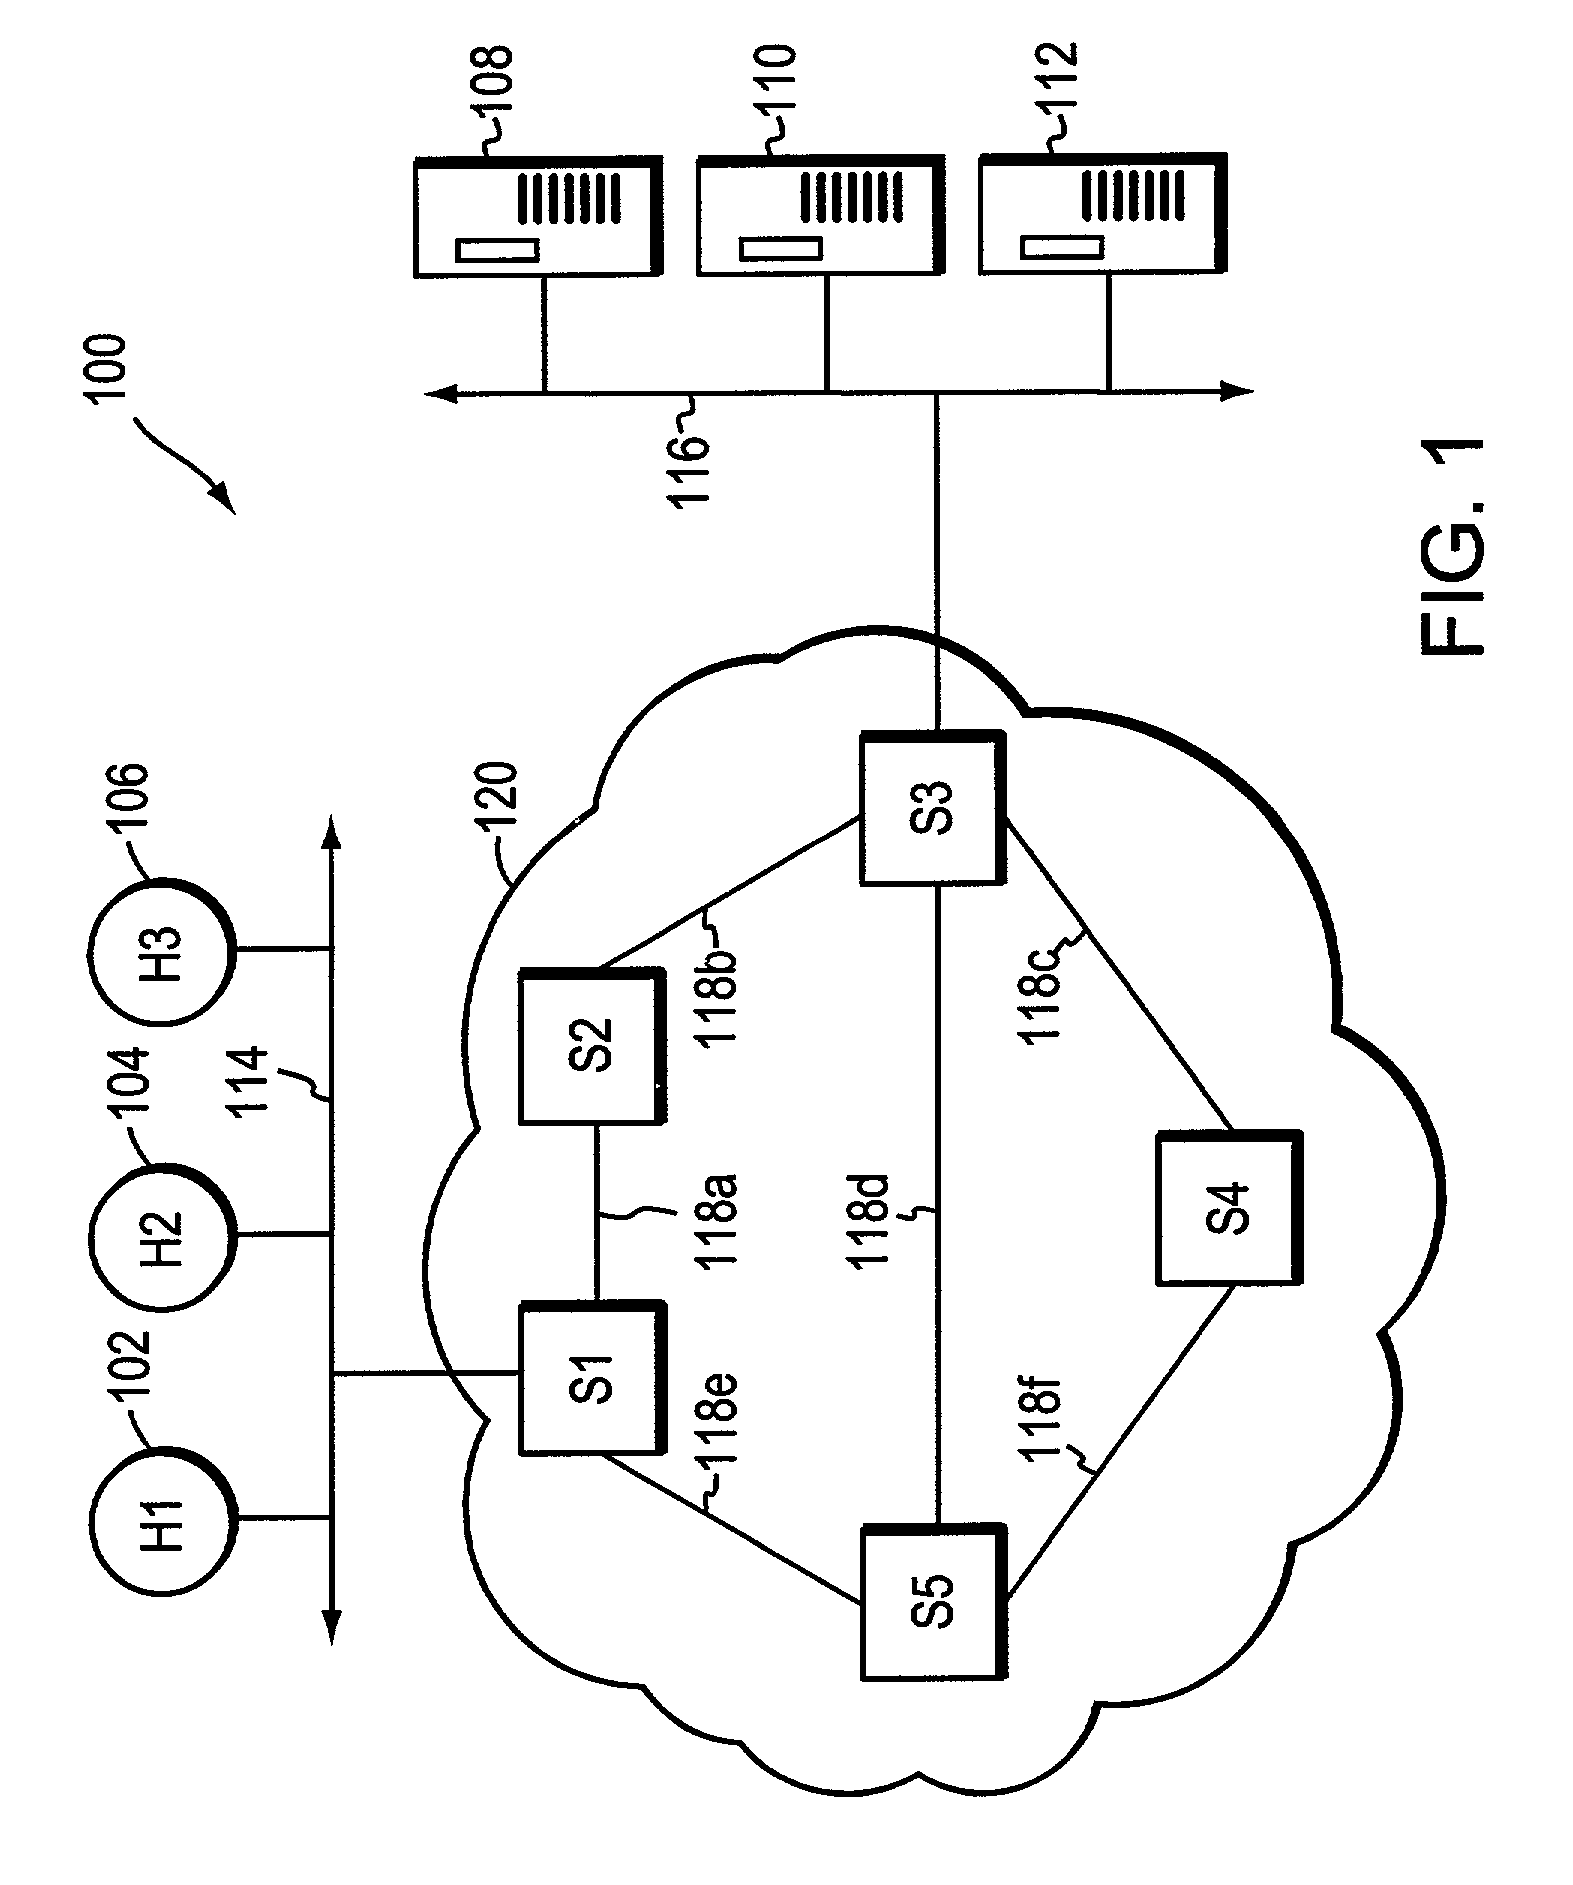 System and method for performing regular expression matching with high parallelism